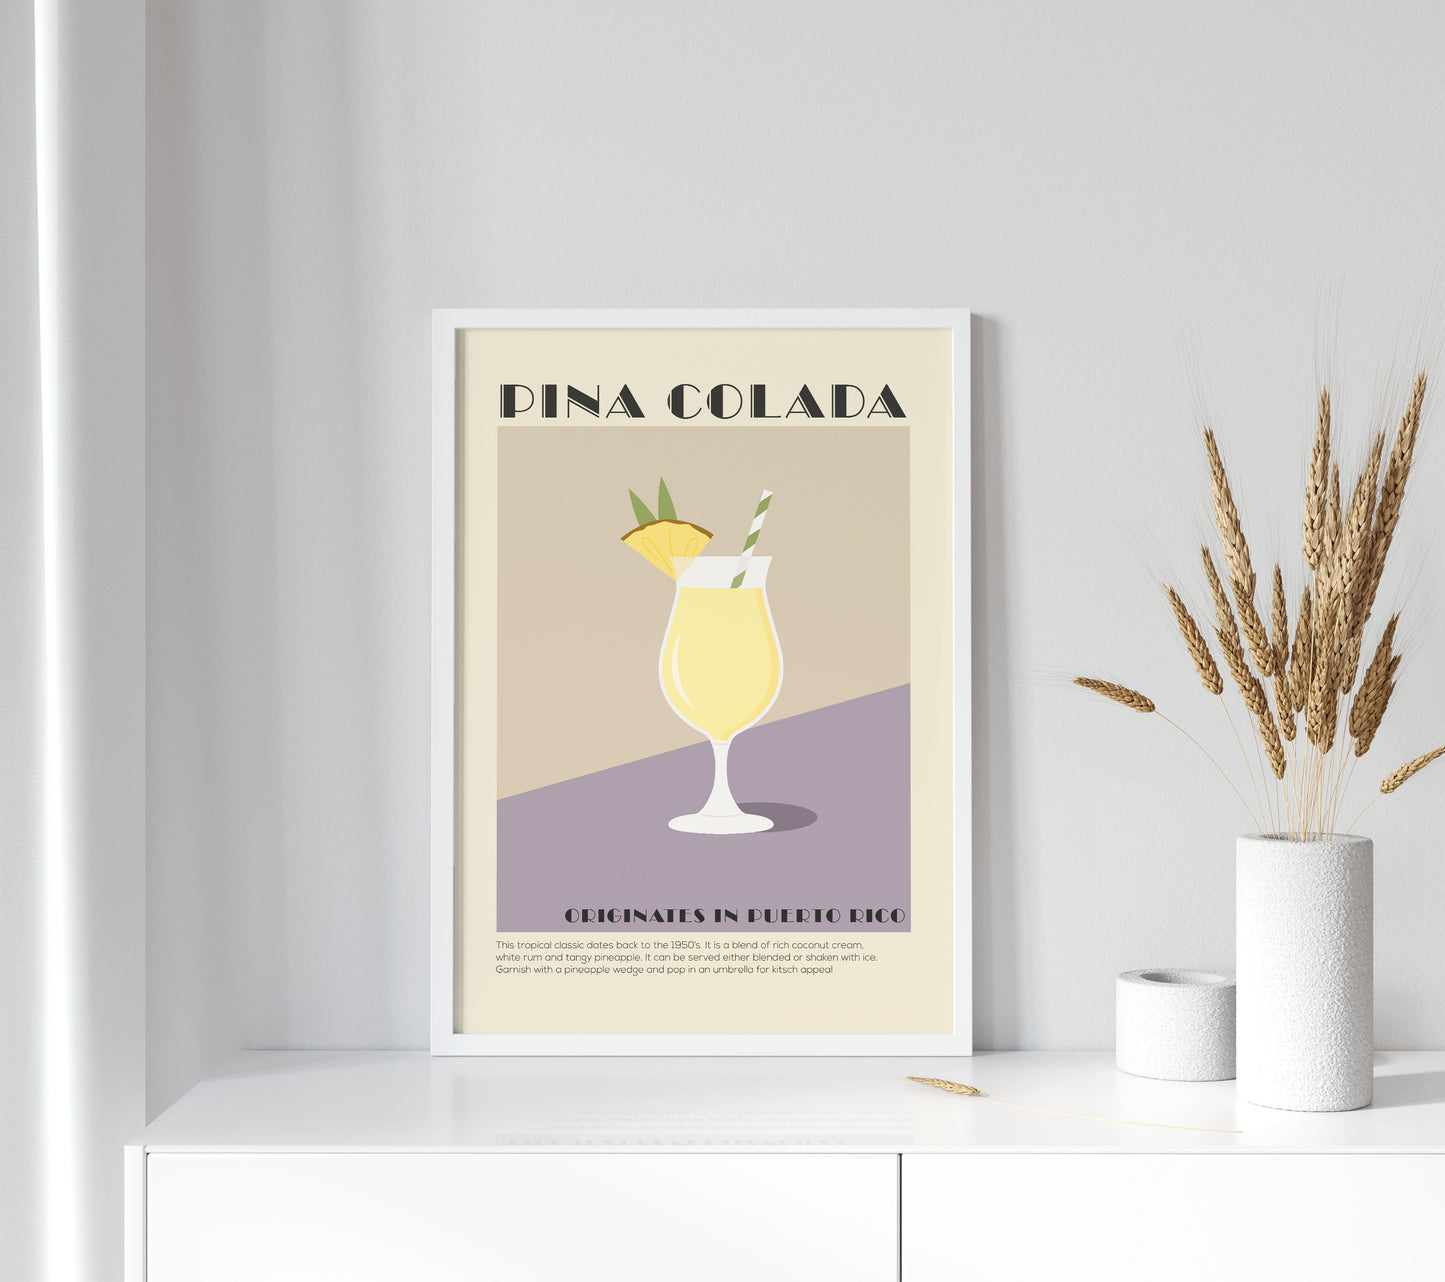 Pina colada cocktail poster in a minimalist style